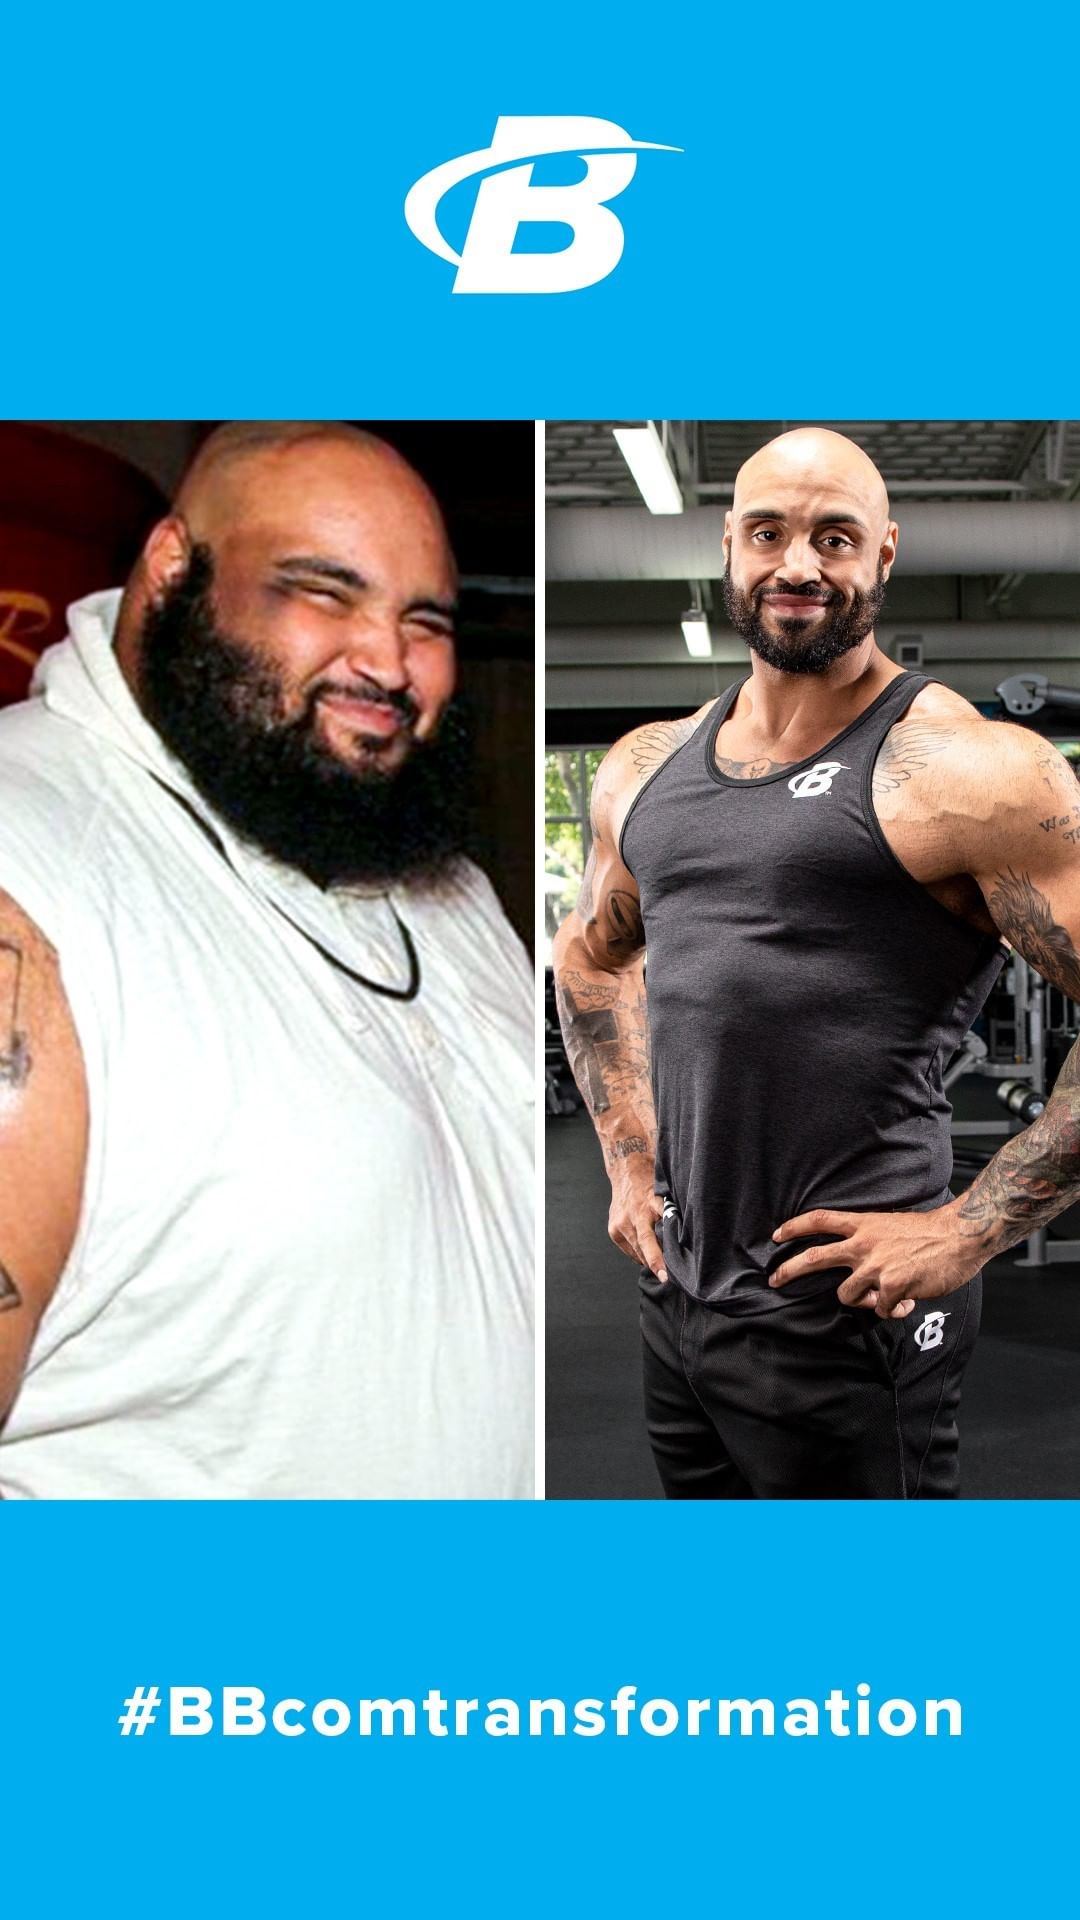 Bodybuilding.com - @possiblepat started his transformation journey by walking to the store. He finished over 300 pounds lighter. 

Walking 2 miles might not seem like a lot, but when you're over 600 p...